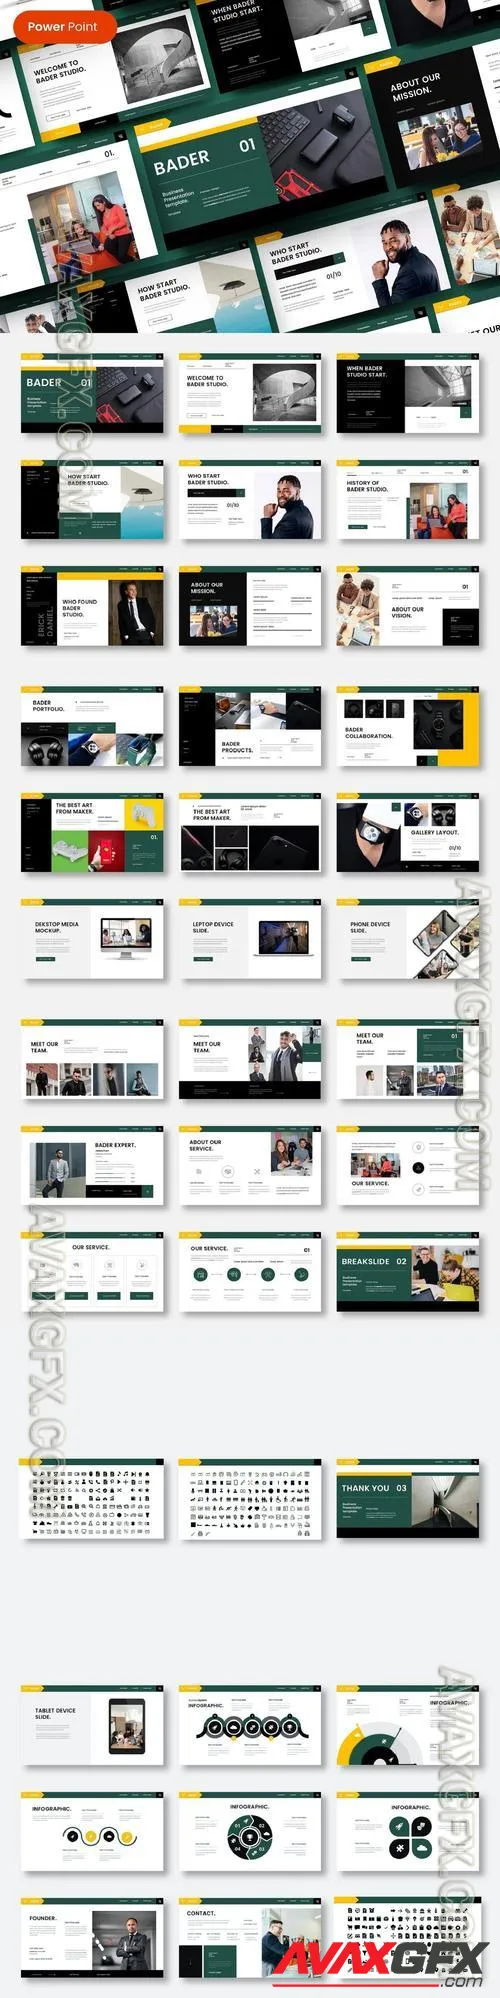 Bader - Business PowerPoint Template